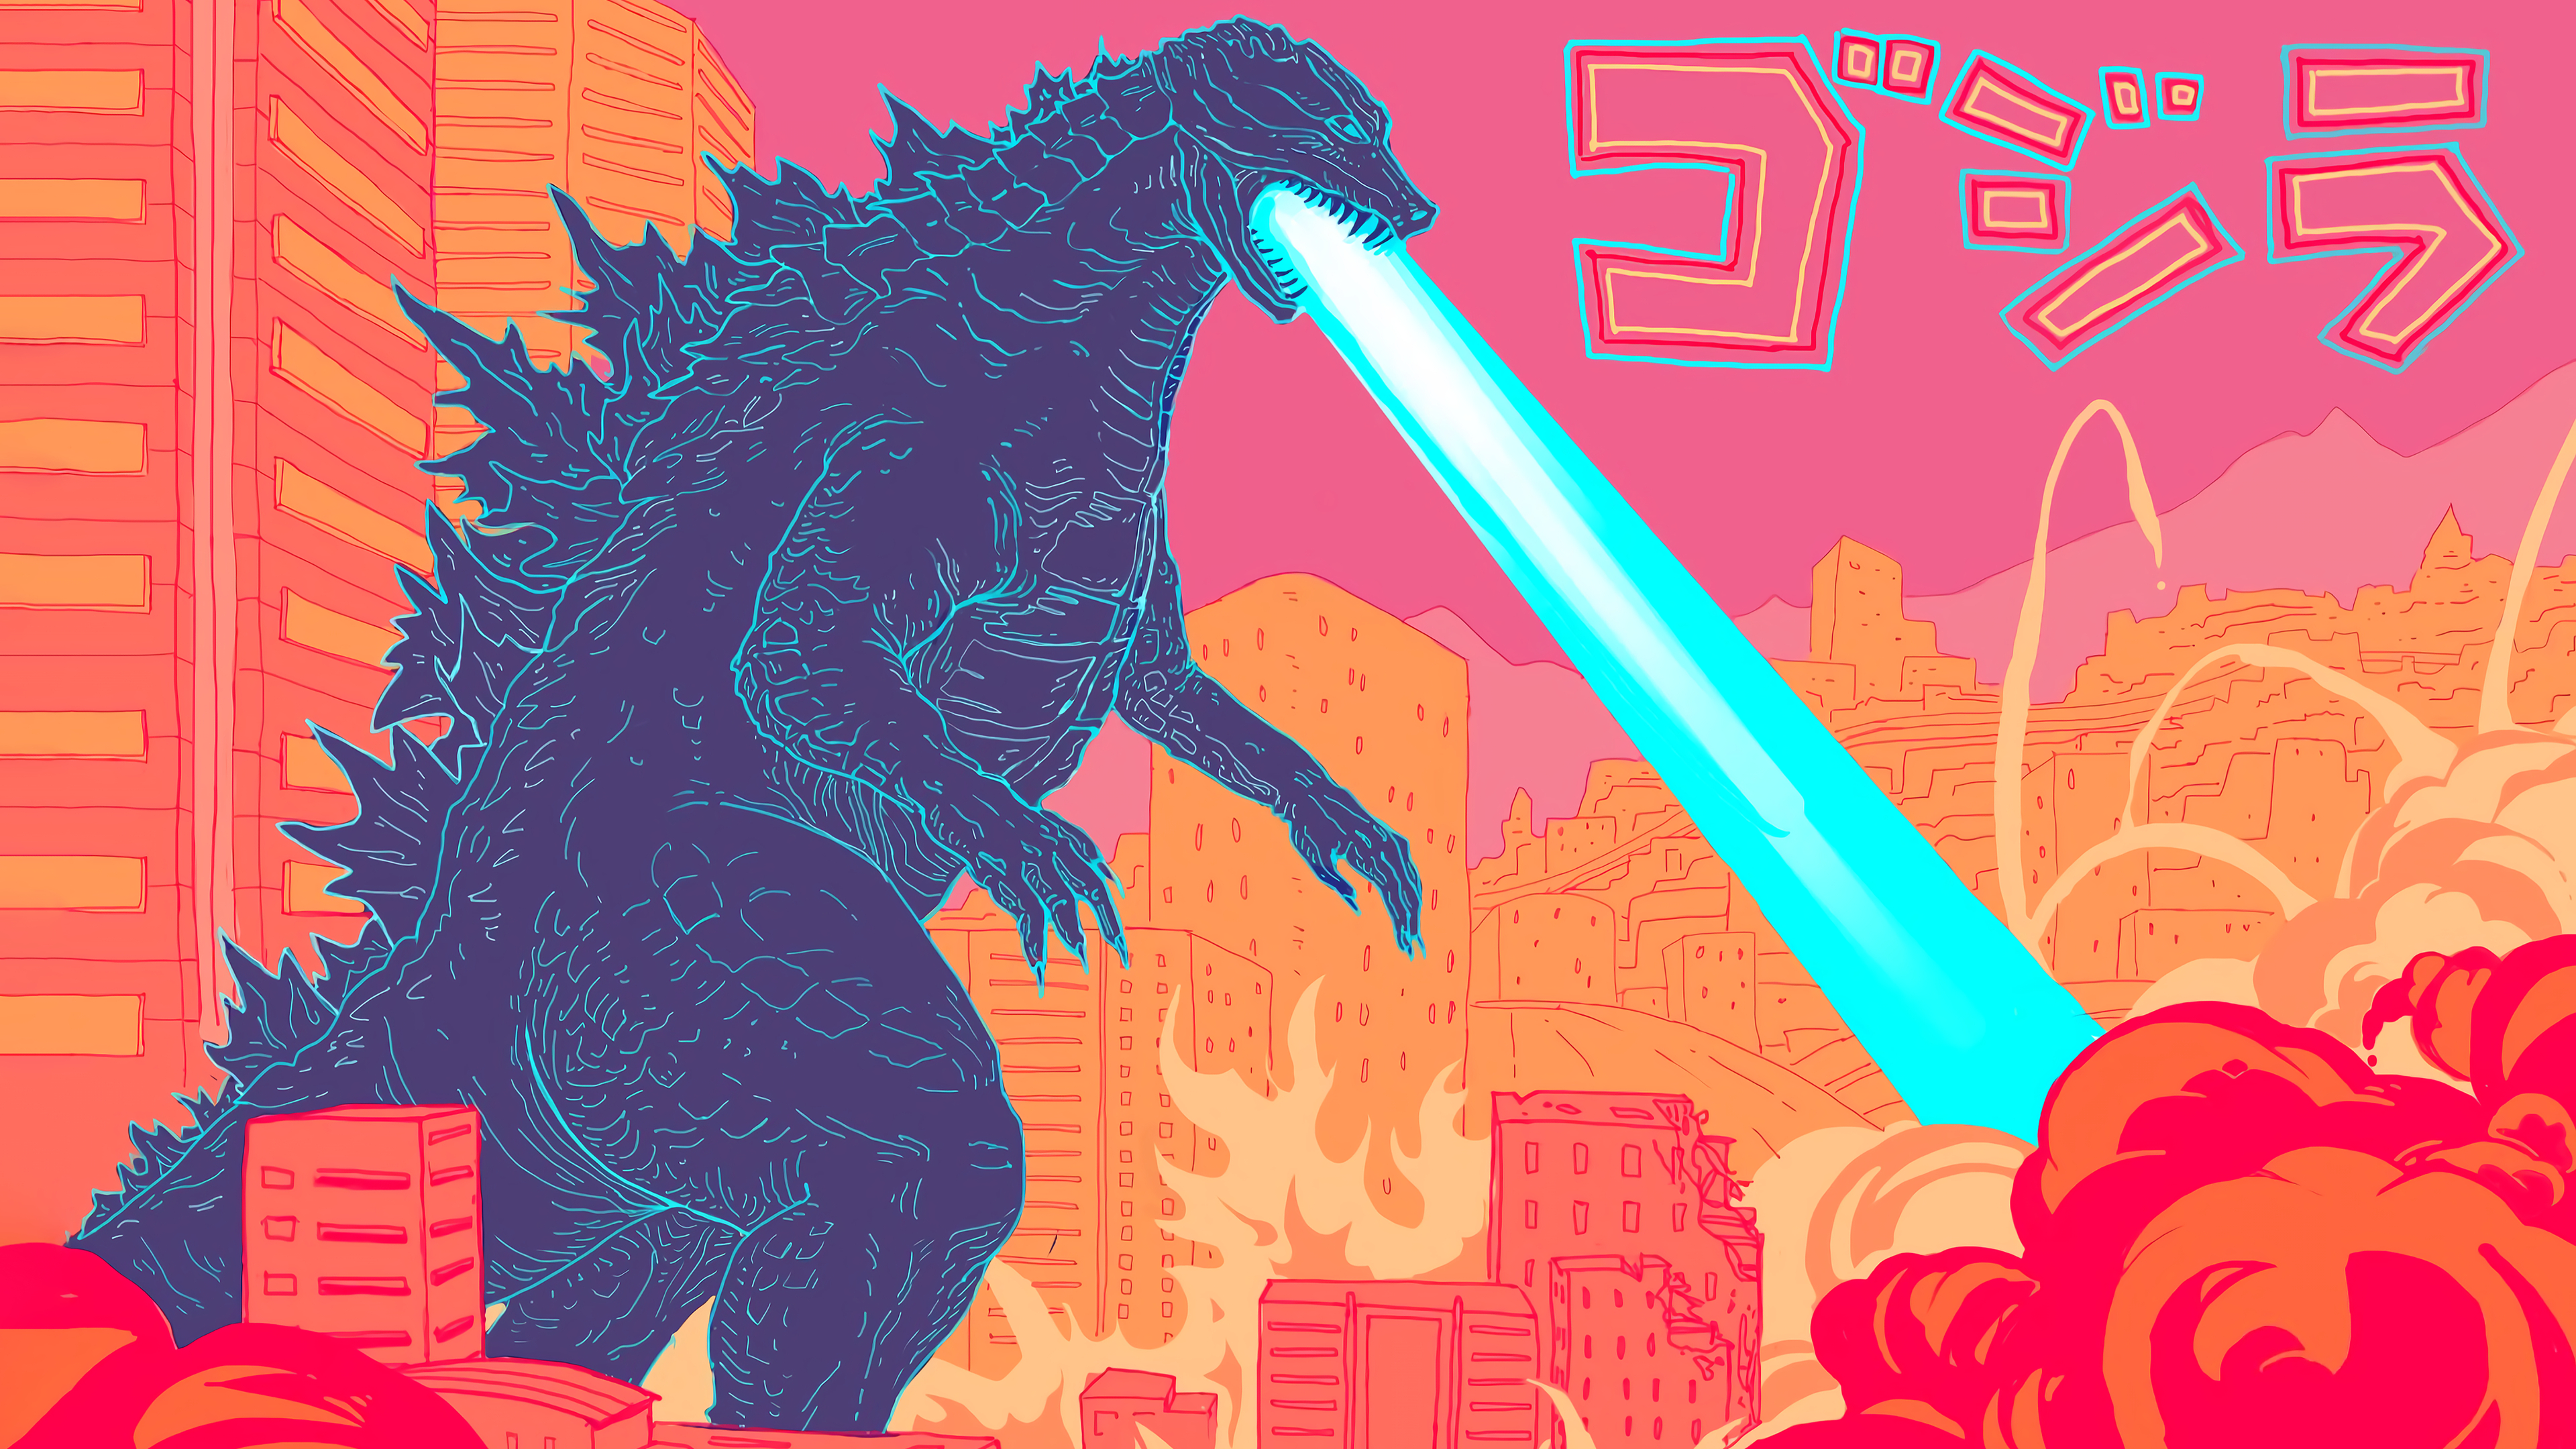 Godzilla 4K wallpapers for your desktop or mobile screen free and easy to  download